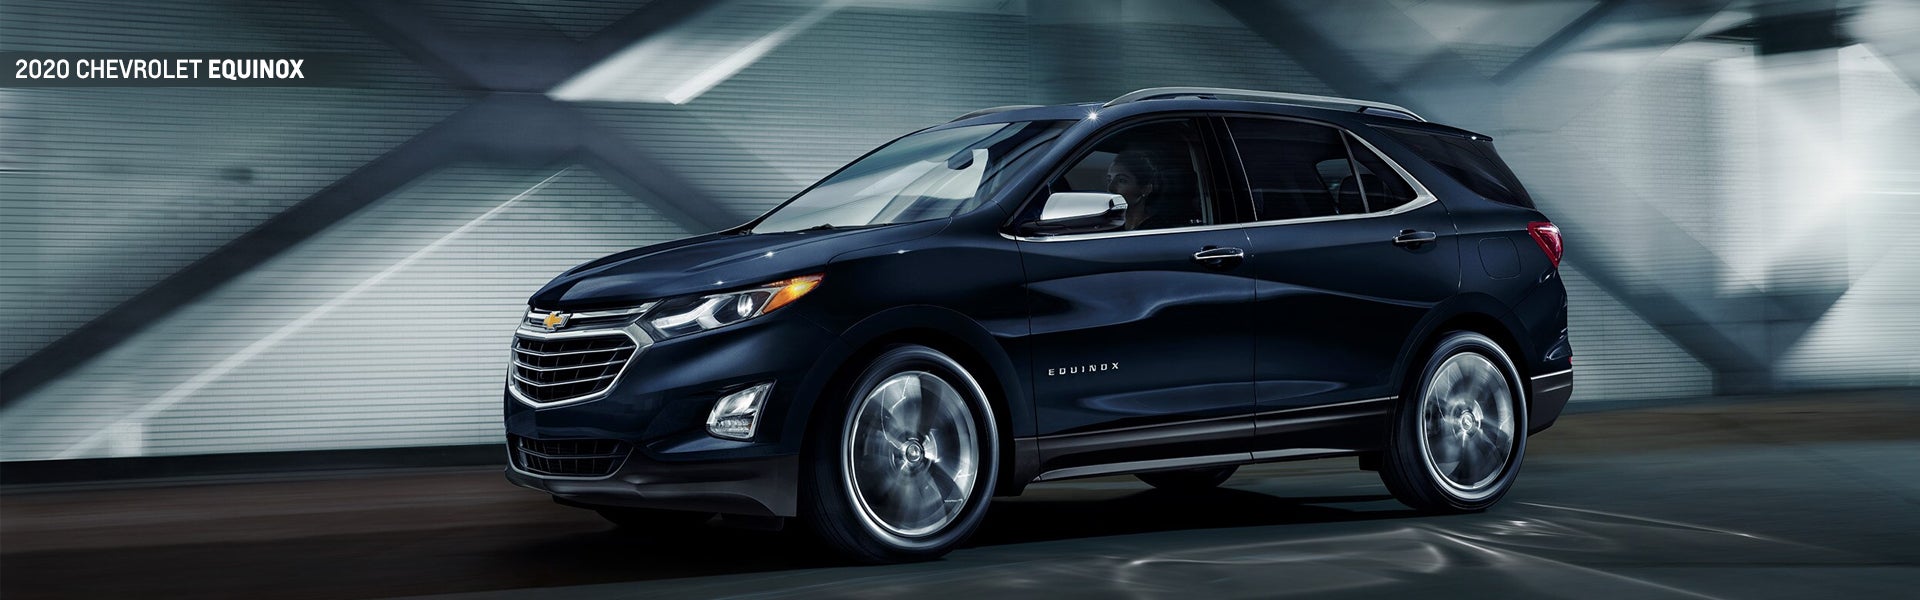 2020 Chevrolet Equinox at Phelps Chevrolet in Greenville